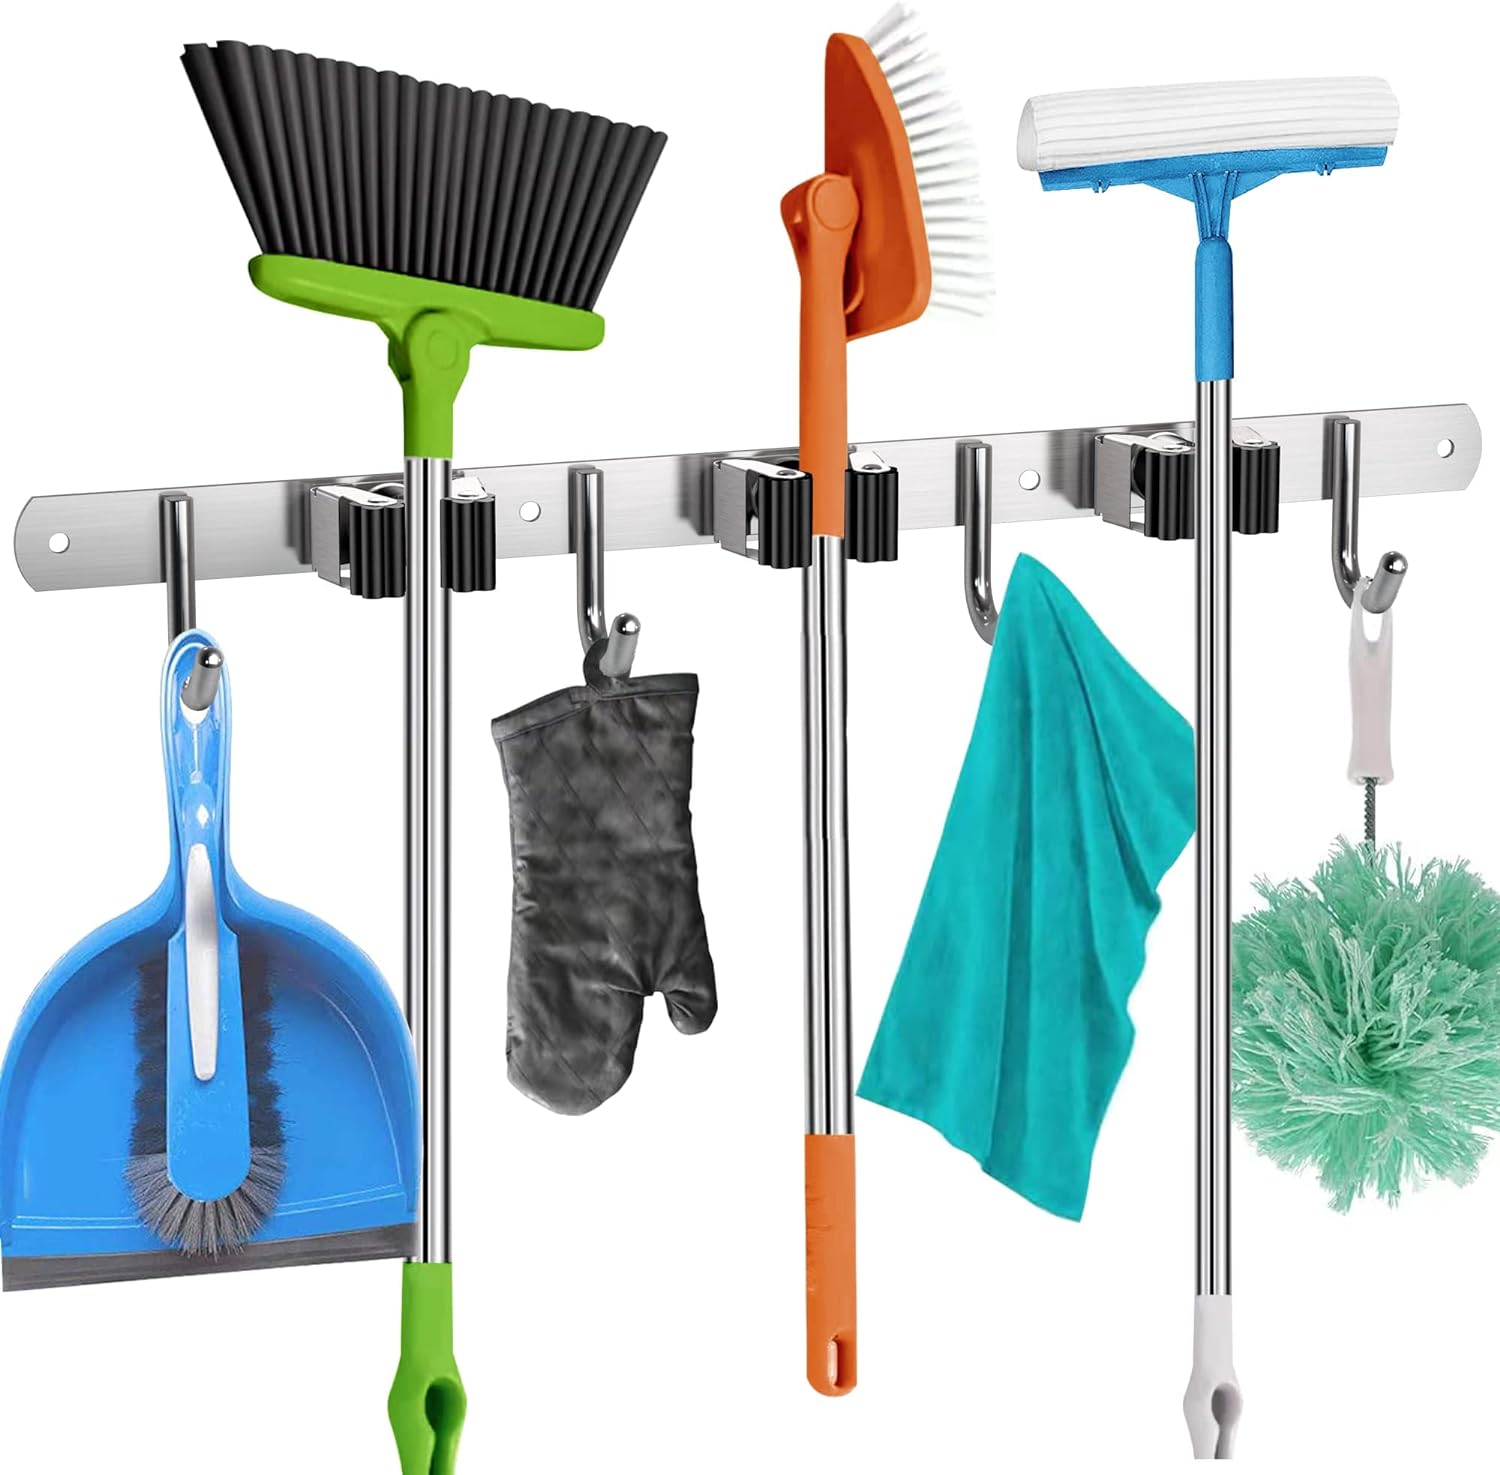 Mop and Broom Holder Wall Mount Self Adhesive - Broom Hanger Wall Mount - Mop Holder Wall Mounted - Broom Rack - Utility Hooks for Broom and Mop Organizer Wall Hanging - Broom Closet Organizer Storage